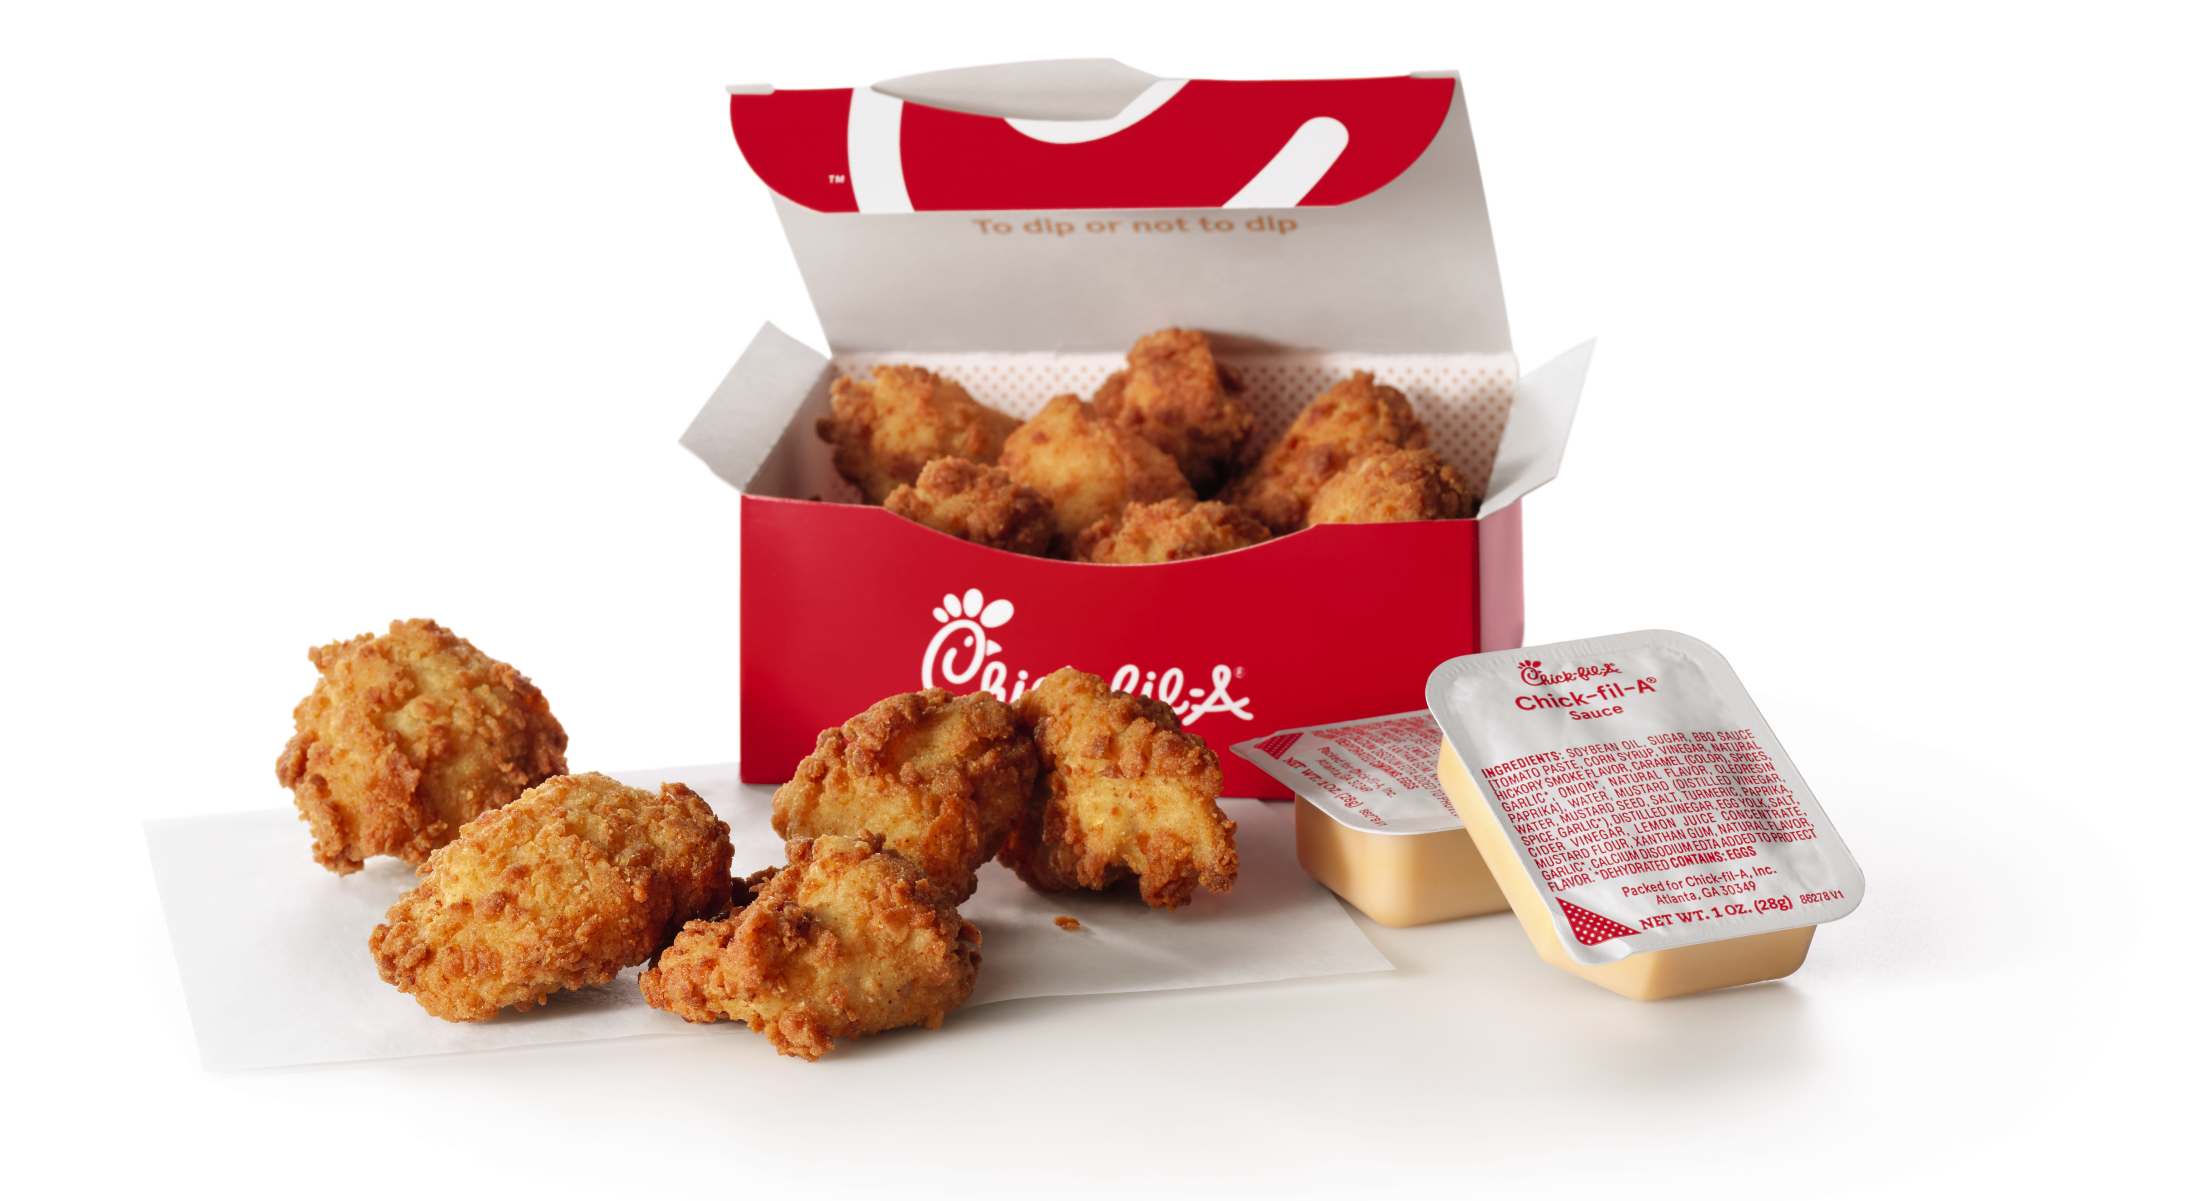 chick-fil-a nuggets inside package